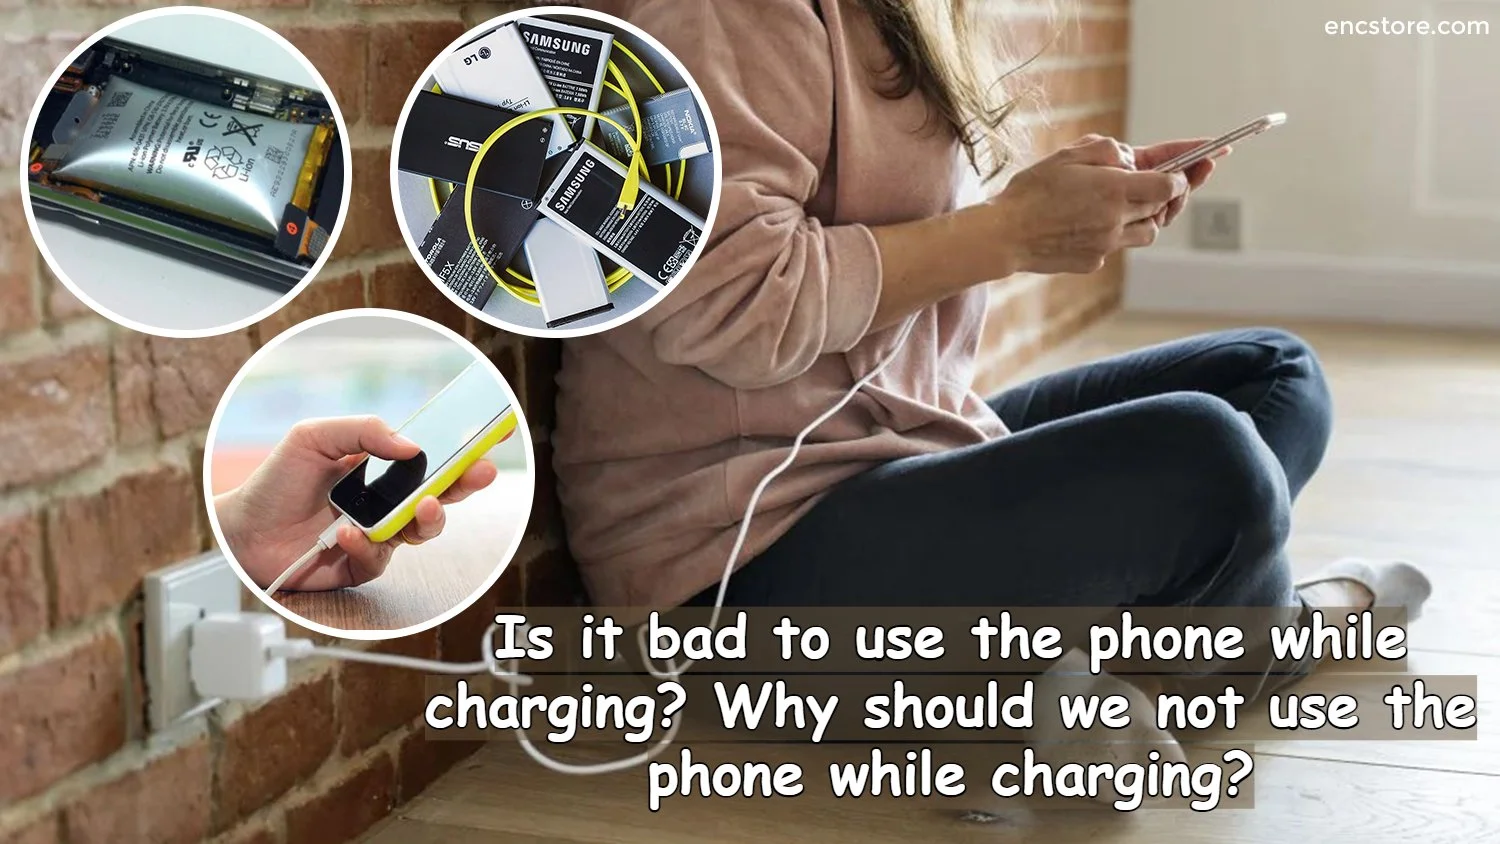 Why should we not use the phone while charging?